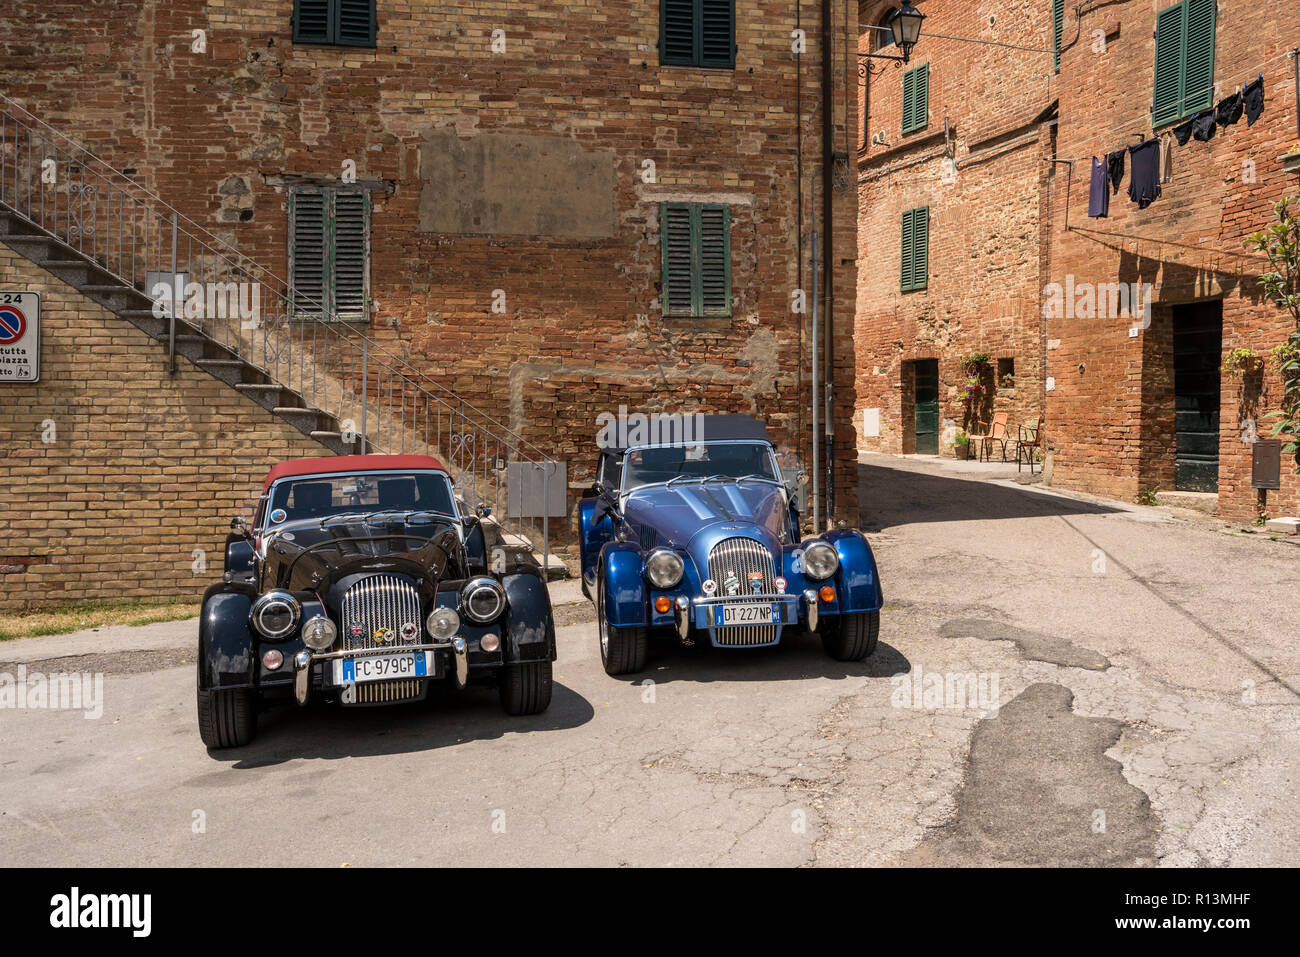 Black and blue British Morgan classic vintage cars parked in Chiusure, a small village in the Province of Siena, Tuscany, Italy Stock Photo